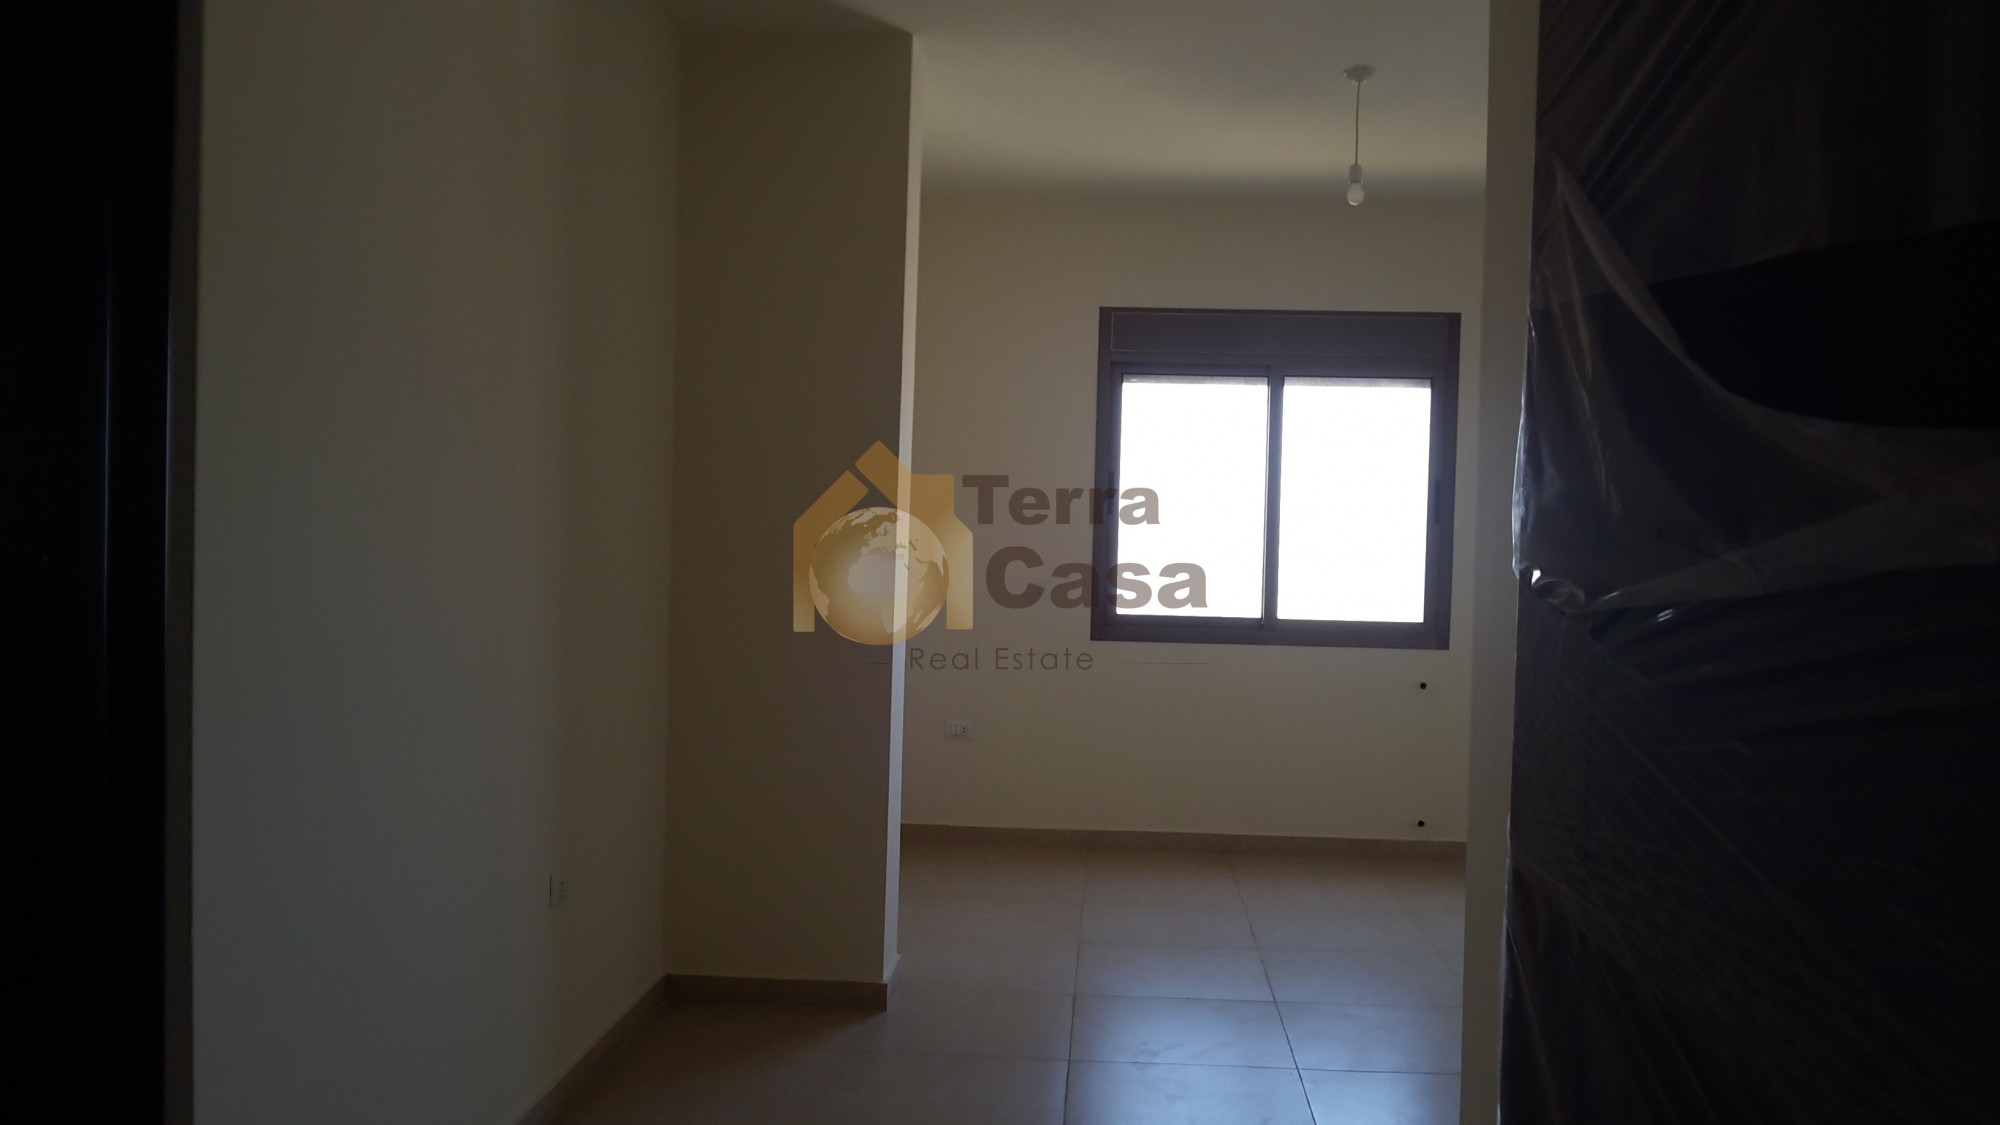 Apartment for sale in zahle ksara brand with two master bedrooms .